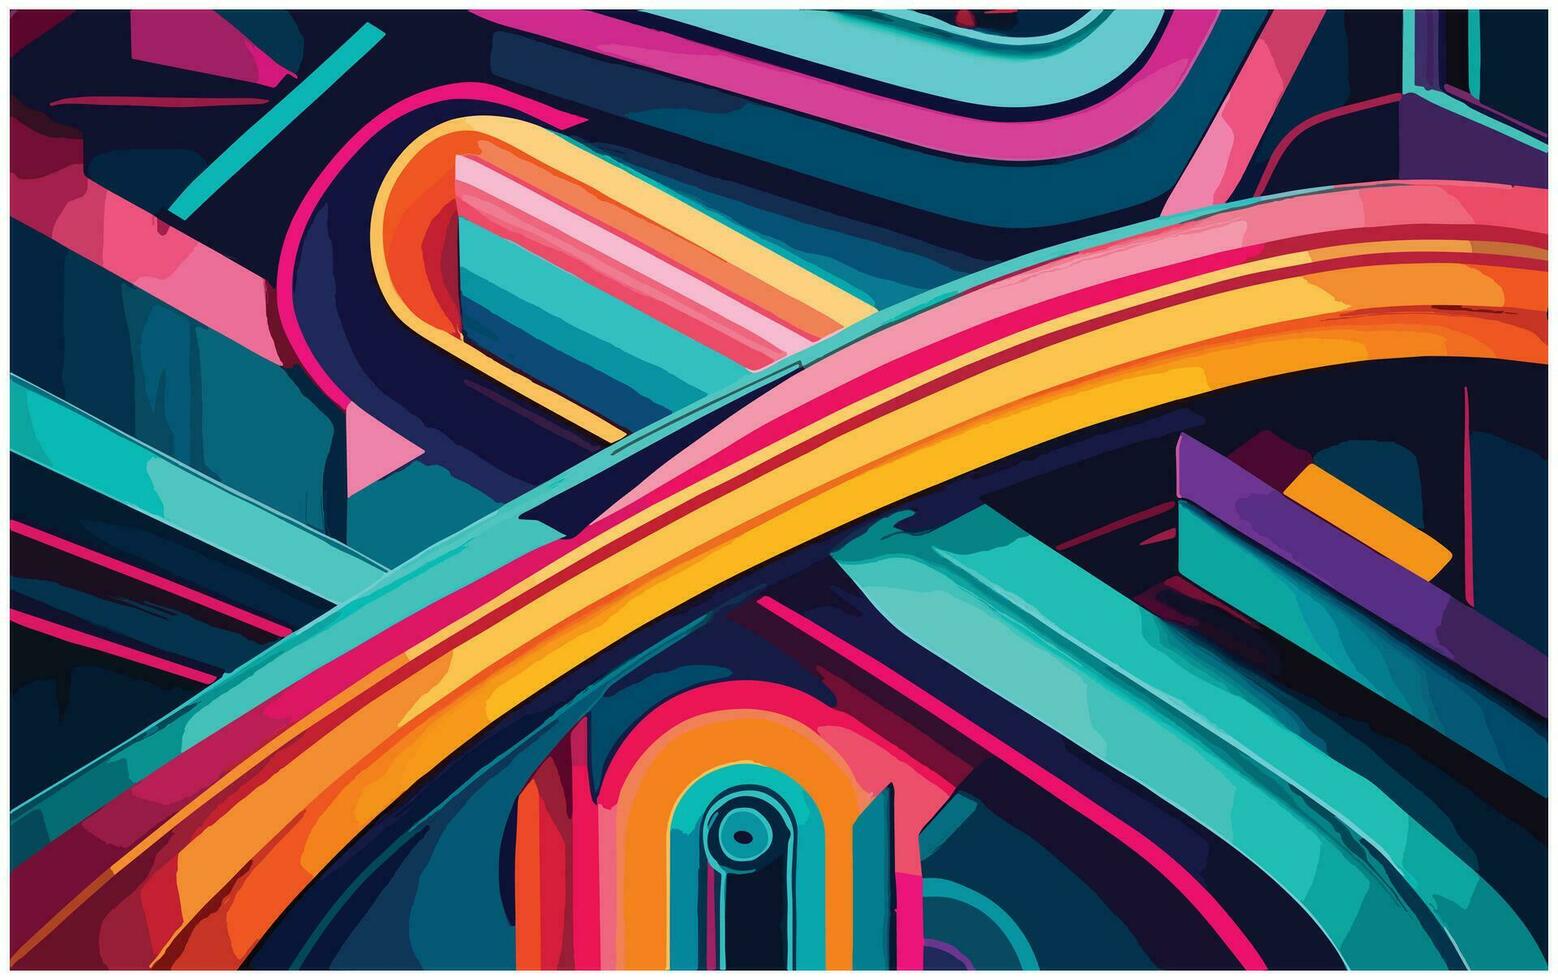 abstract background with colorful geometric shapes. vector illustration, flat design, abstract colorful background with swirls and lines in retro style, vector illustration